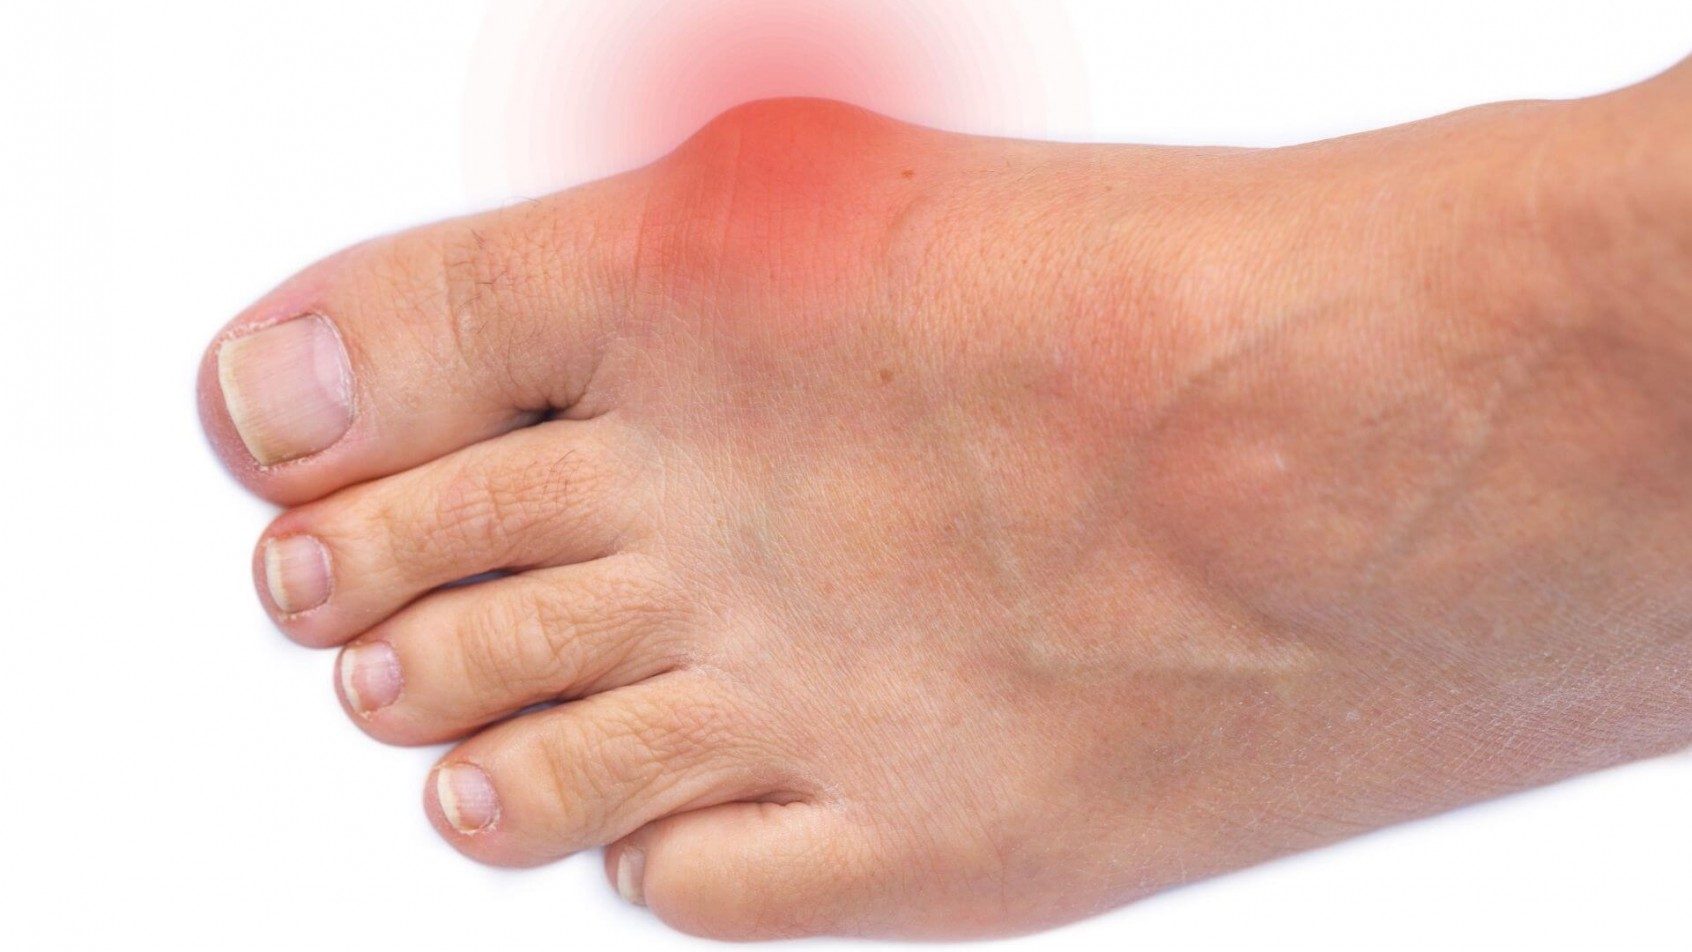 A top view of a foot with a bunion under the big toe, highlighted in red to signify pain